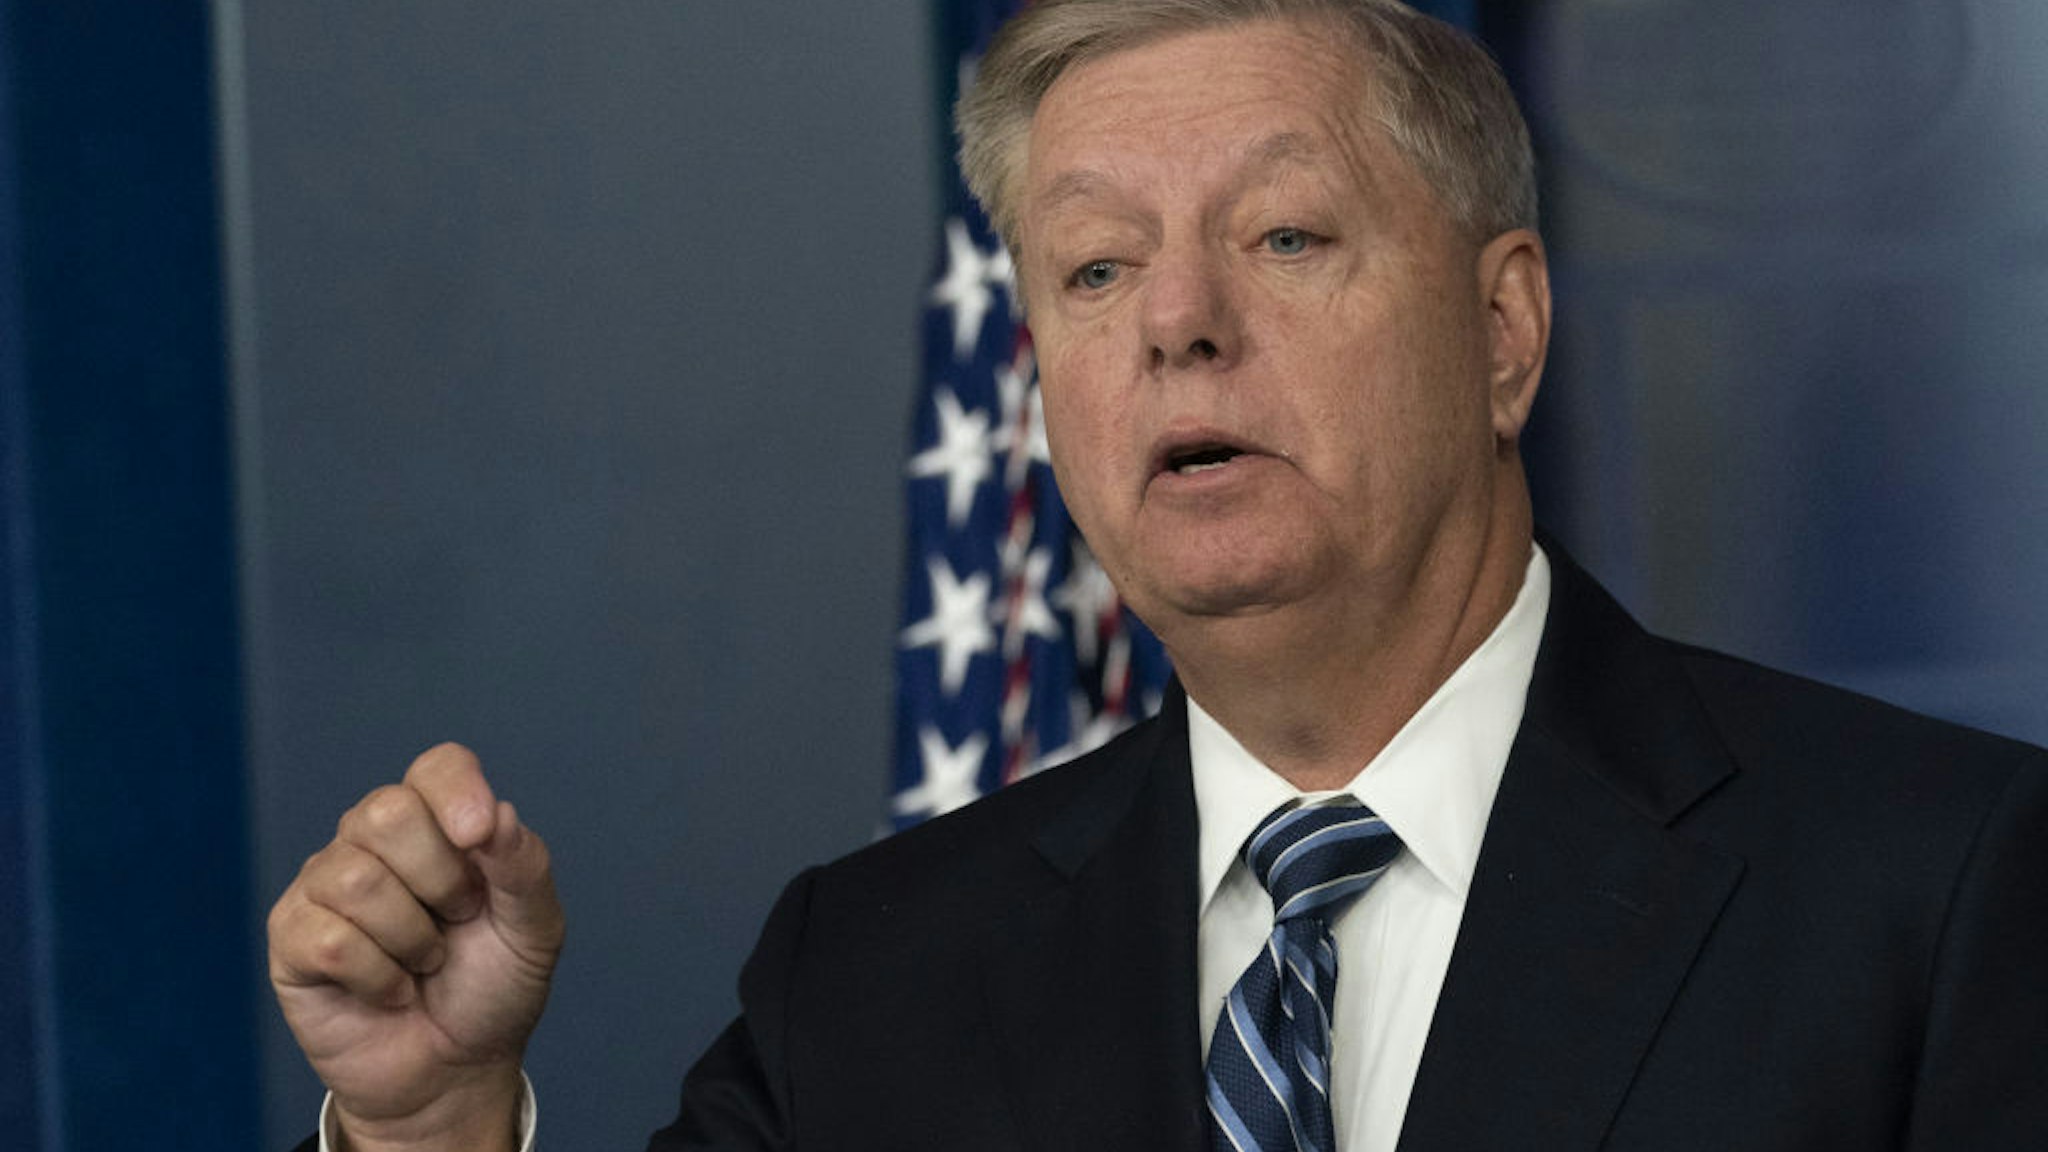 Senator Lindsey Graham, a Republican from South Carolina, speaks during a press conference in the briefing room of the White House in Washington, D.C., U.S., on Sunday, Oct. 27, 2019.